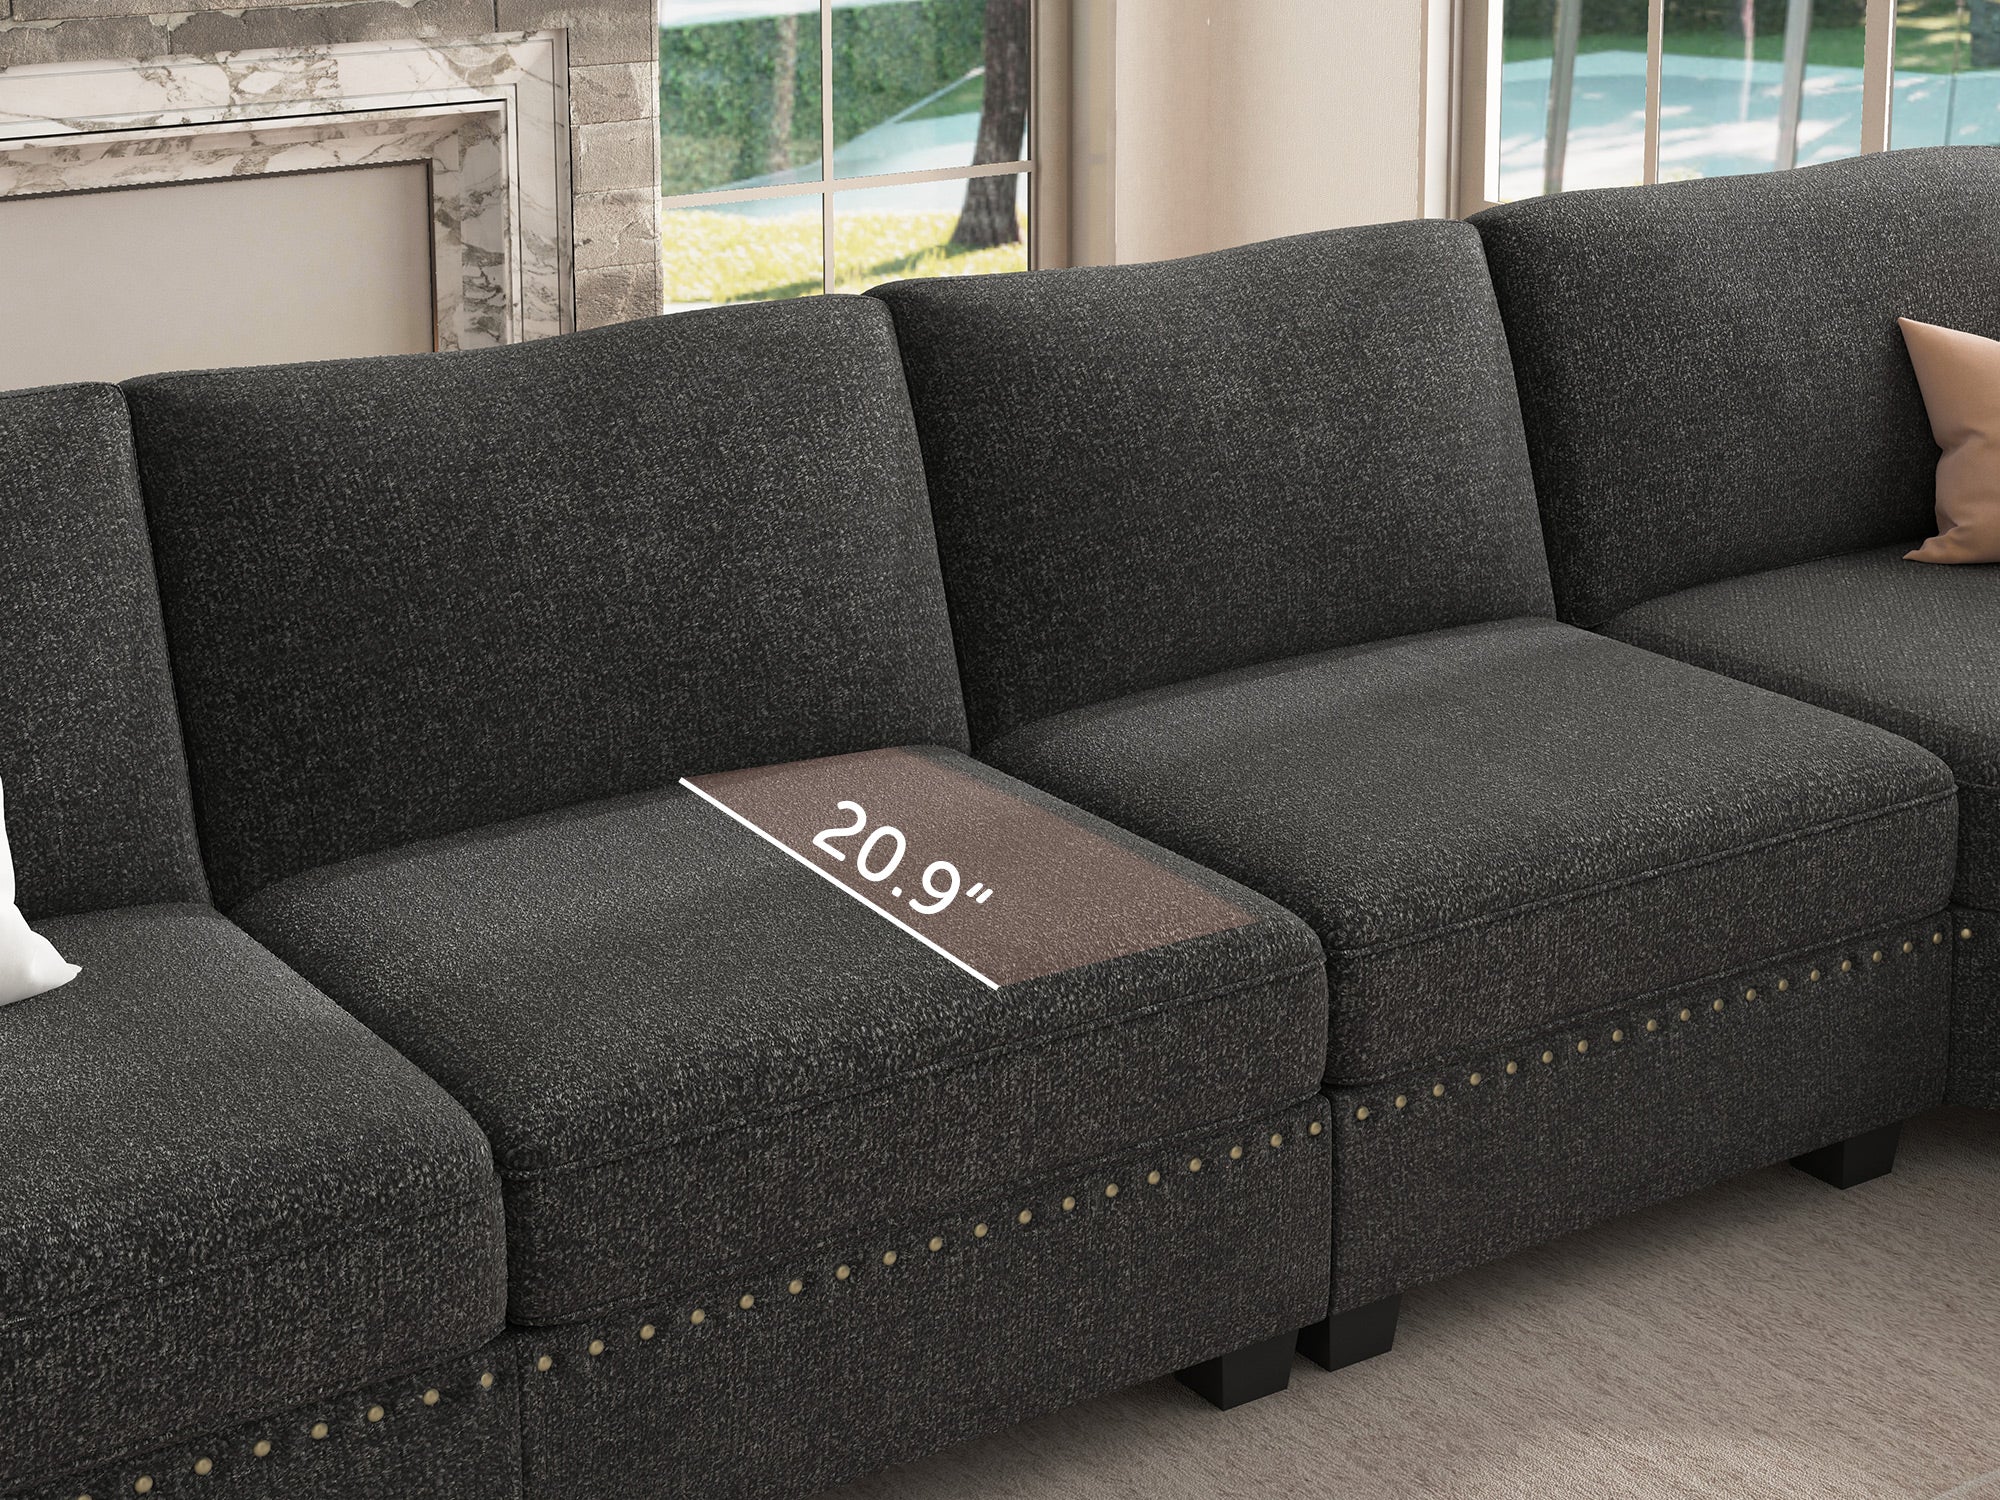 NOLANY 1 Piece Polyester Modular Sectional Seat